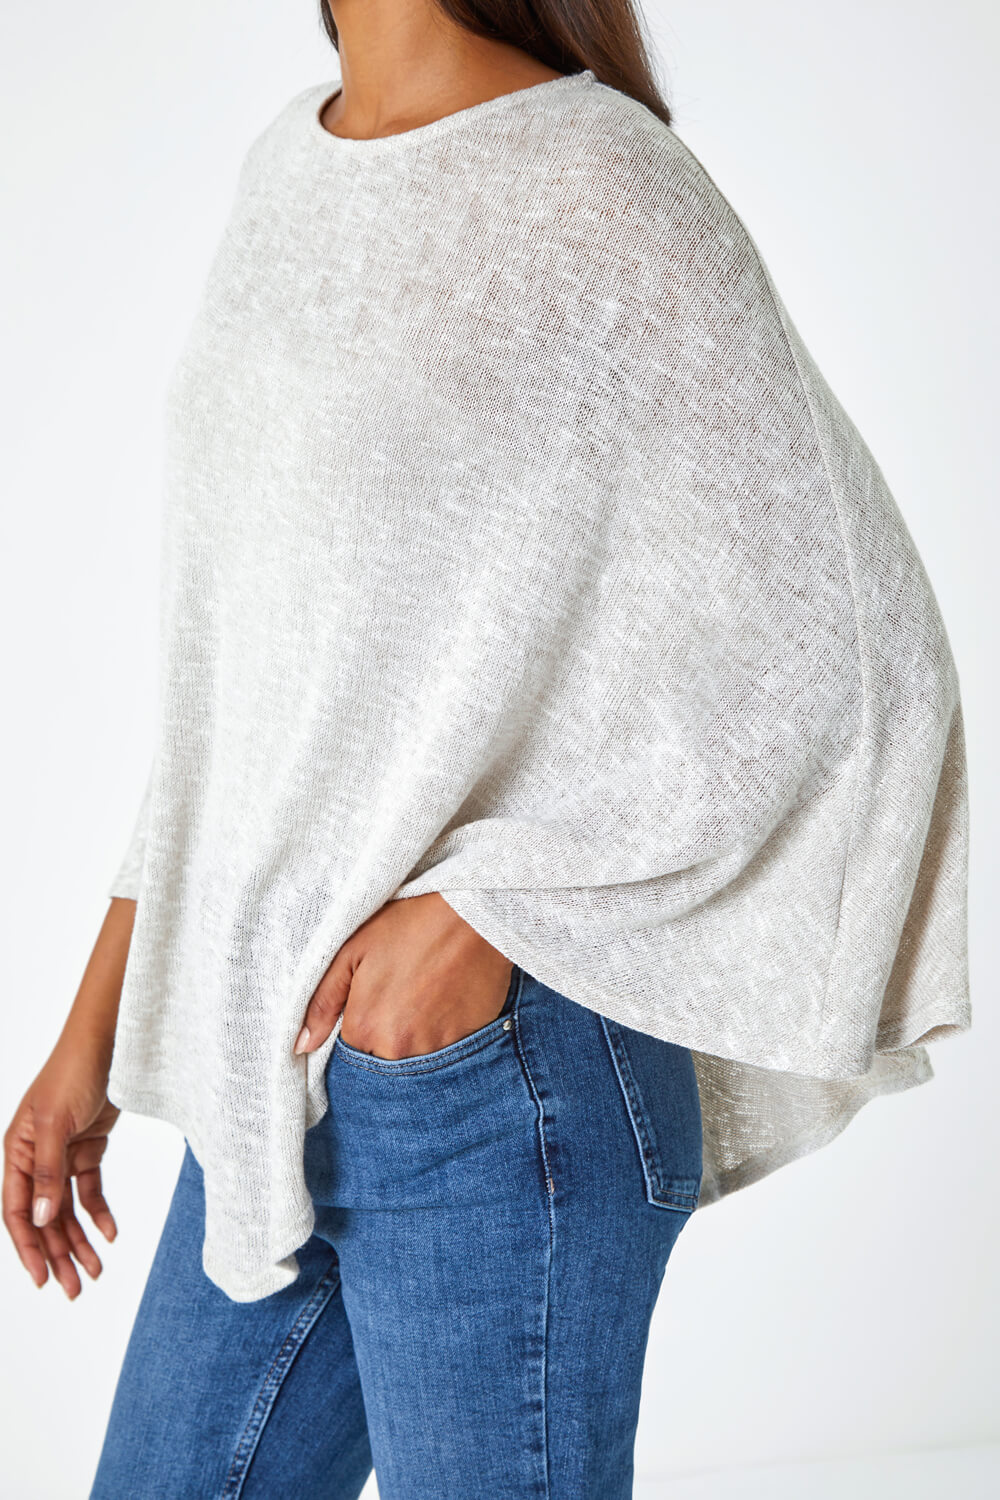 Stone Marl Stretch Knit Jersey Top, Image 5 of 5